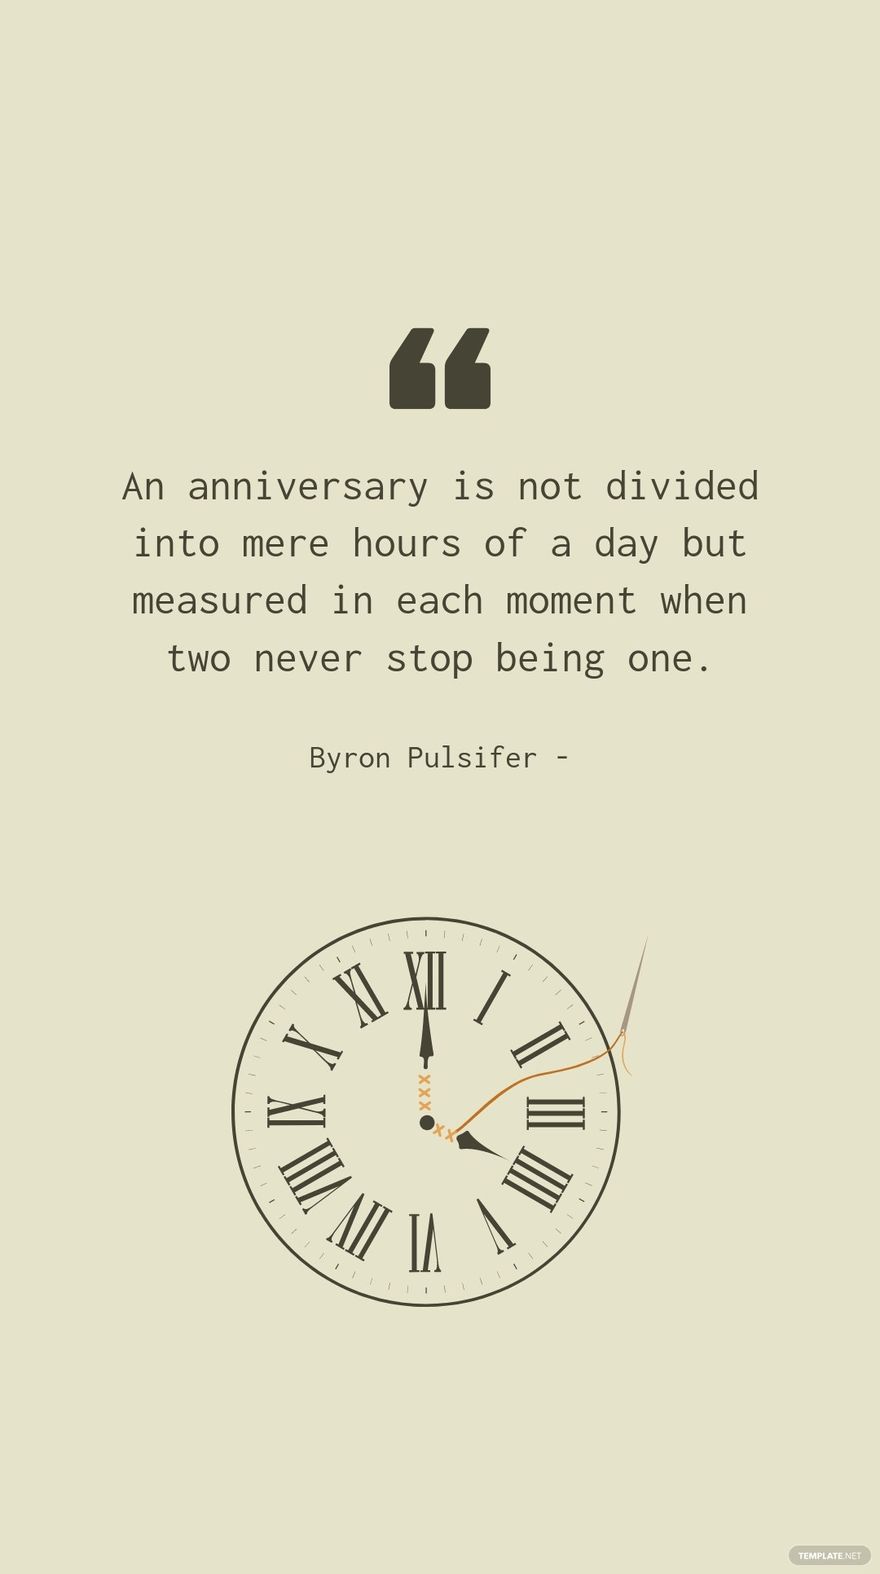 Byron Pulsifer - An anniversary is not divided into mere hours of a day but measured in each moment when two never stop being one.